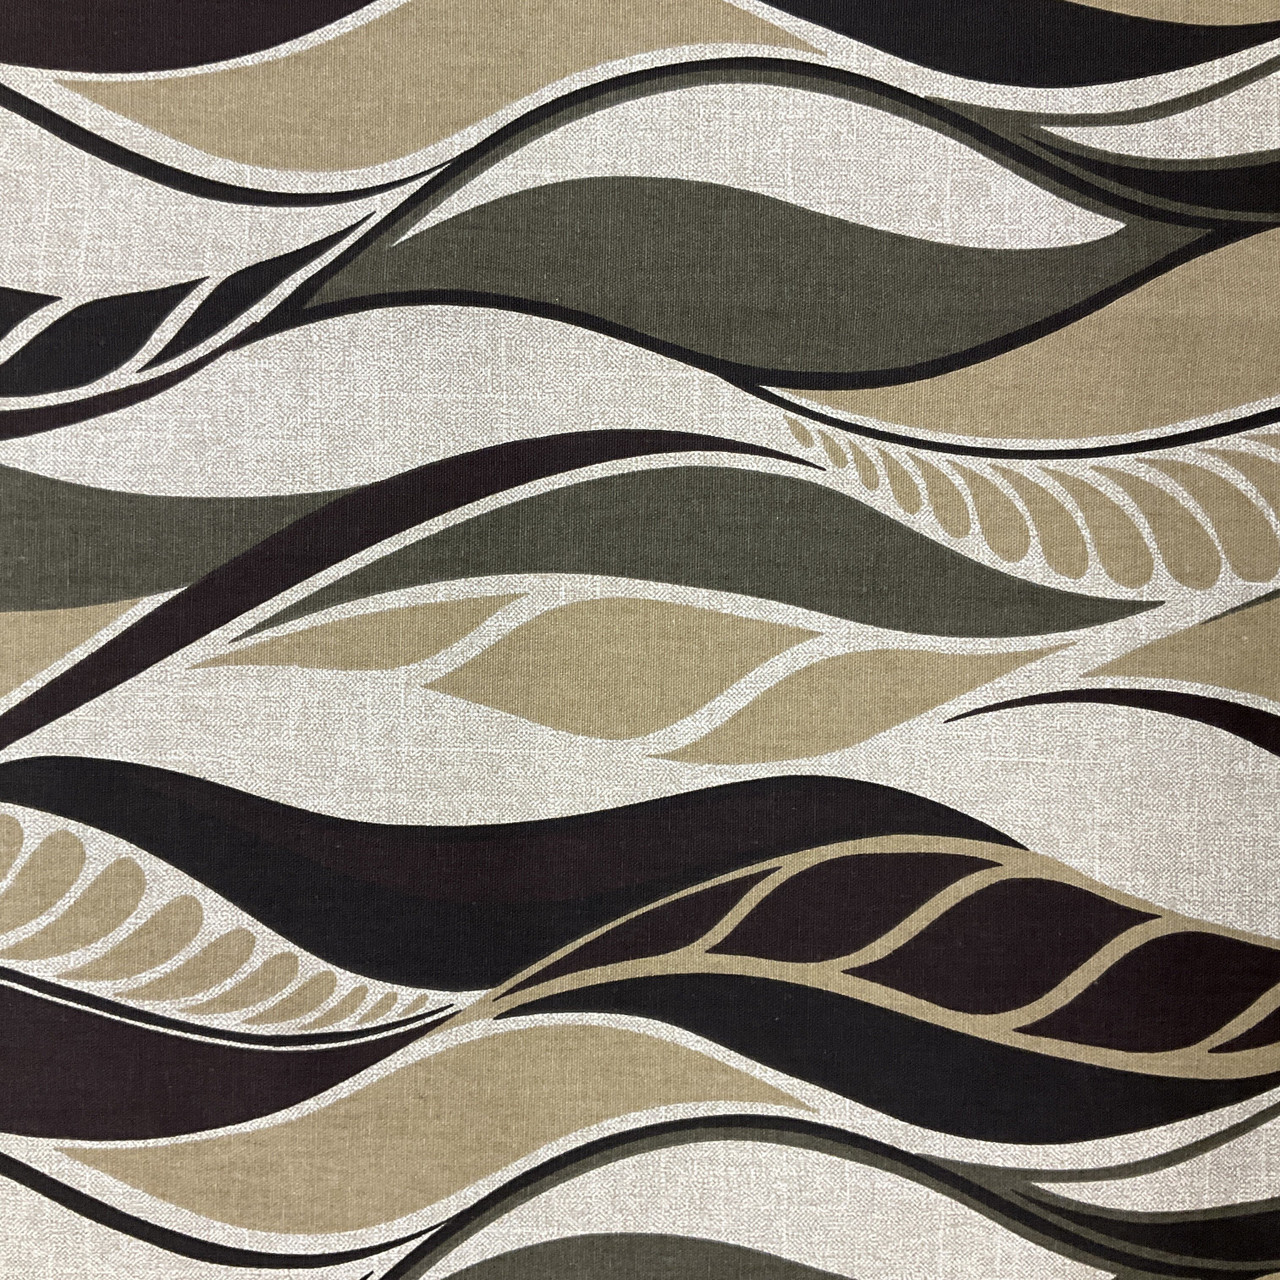 Wavy Leaves in Khaki/Brown/Tan Home Decor Print Fabric, Richloom Screen  Print, Drapery, Lightweight Upholstery, By The Yard